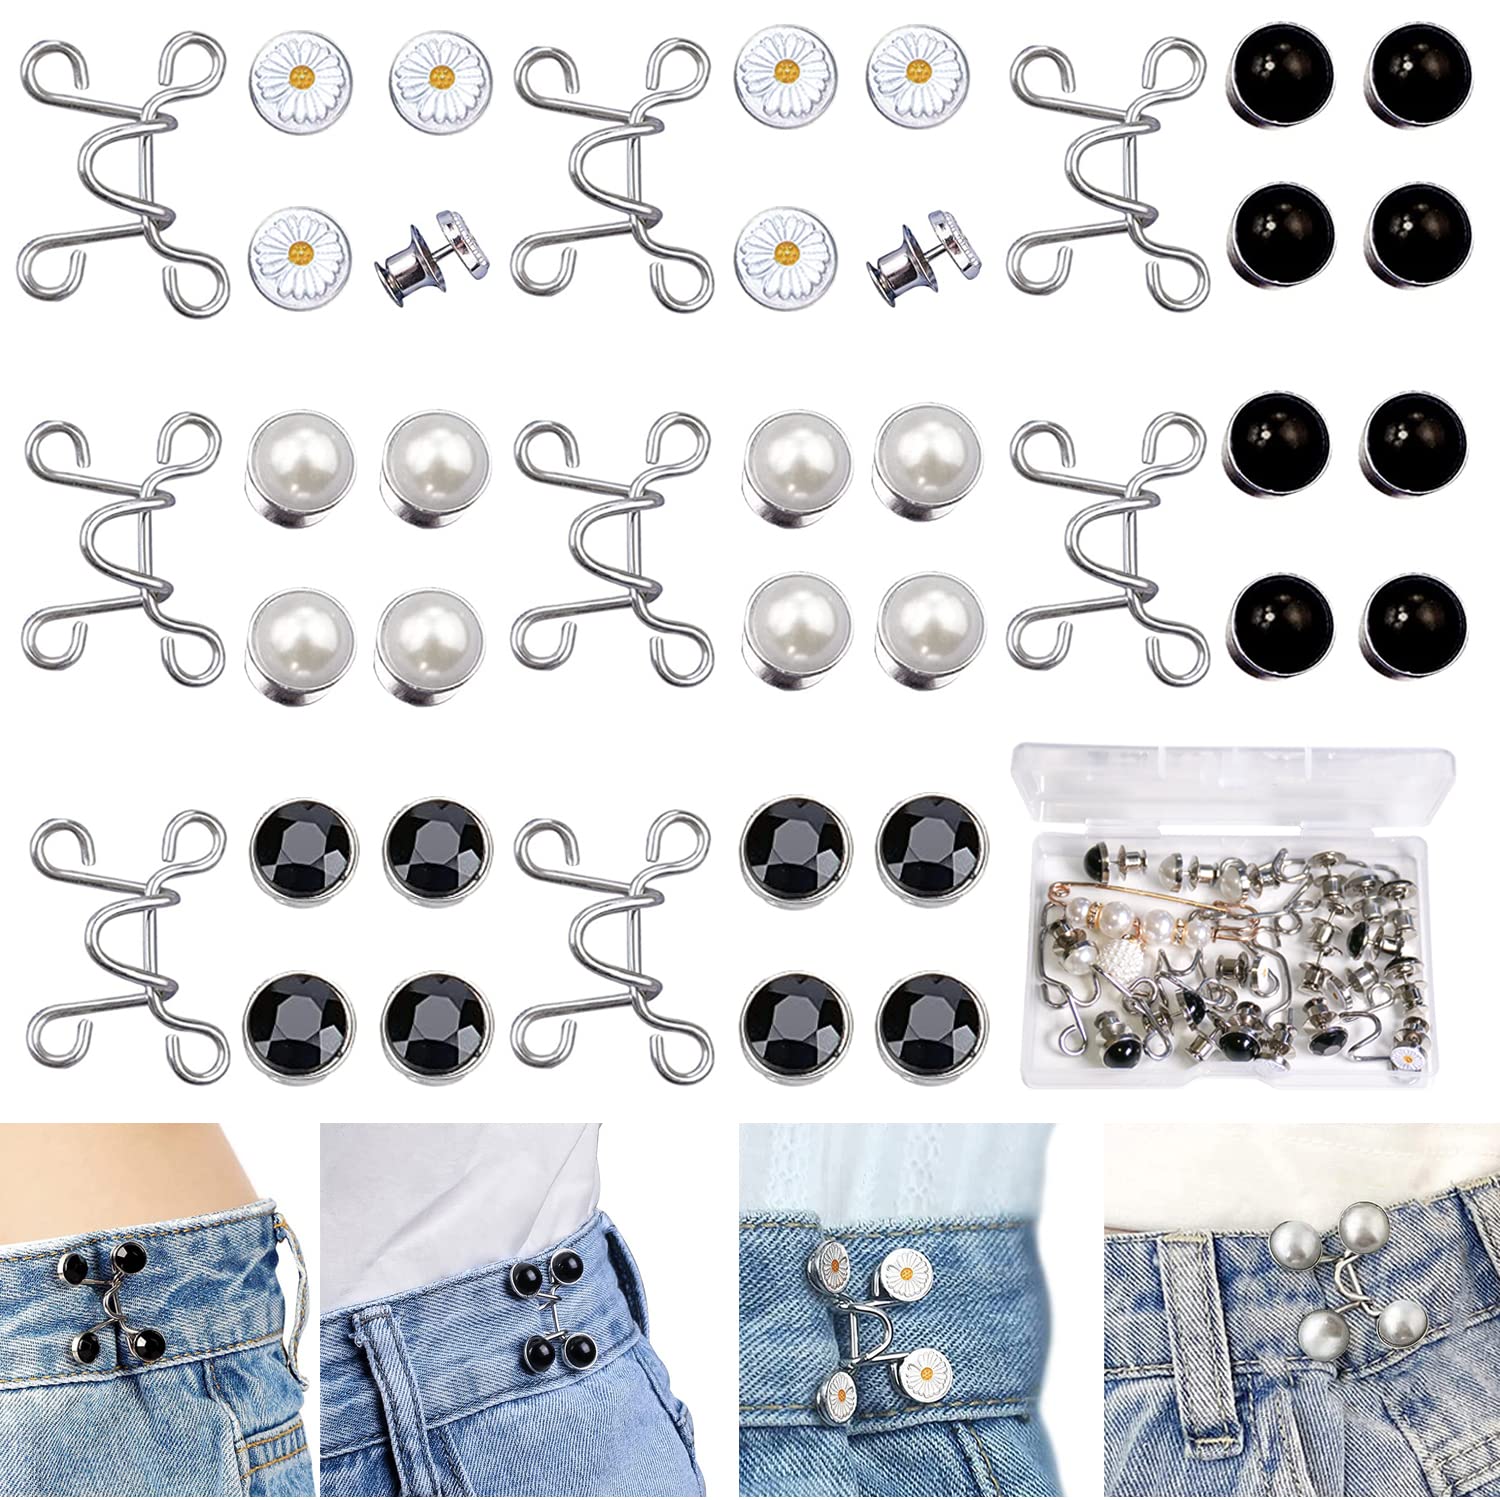 8 Sets Pant Waist Tightener Button Pins for Jeans Too Big Jeans